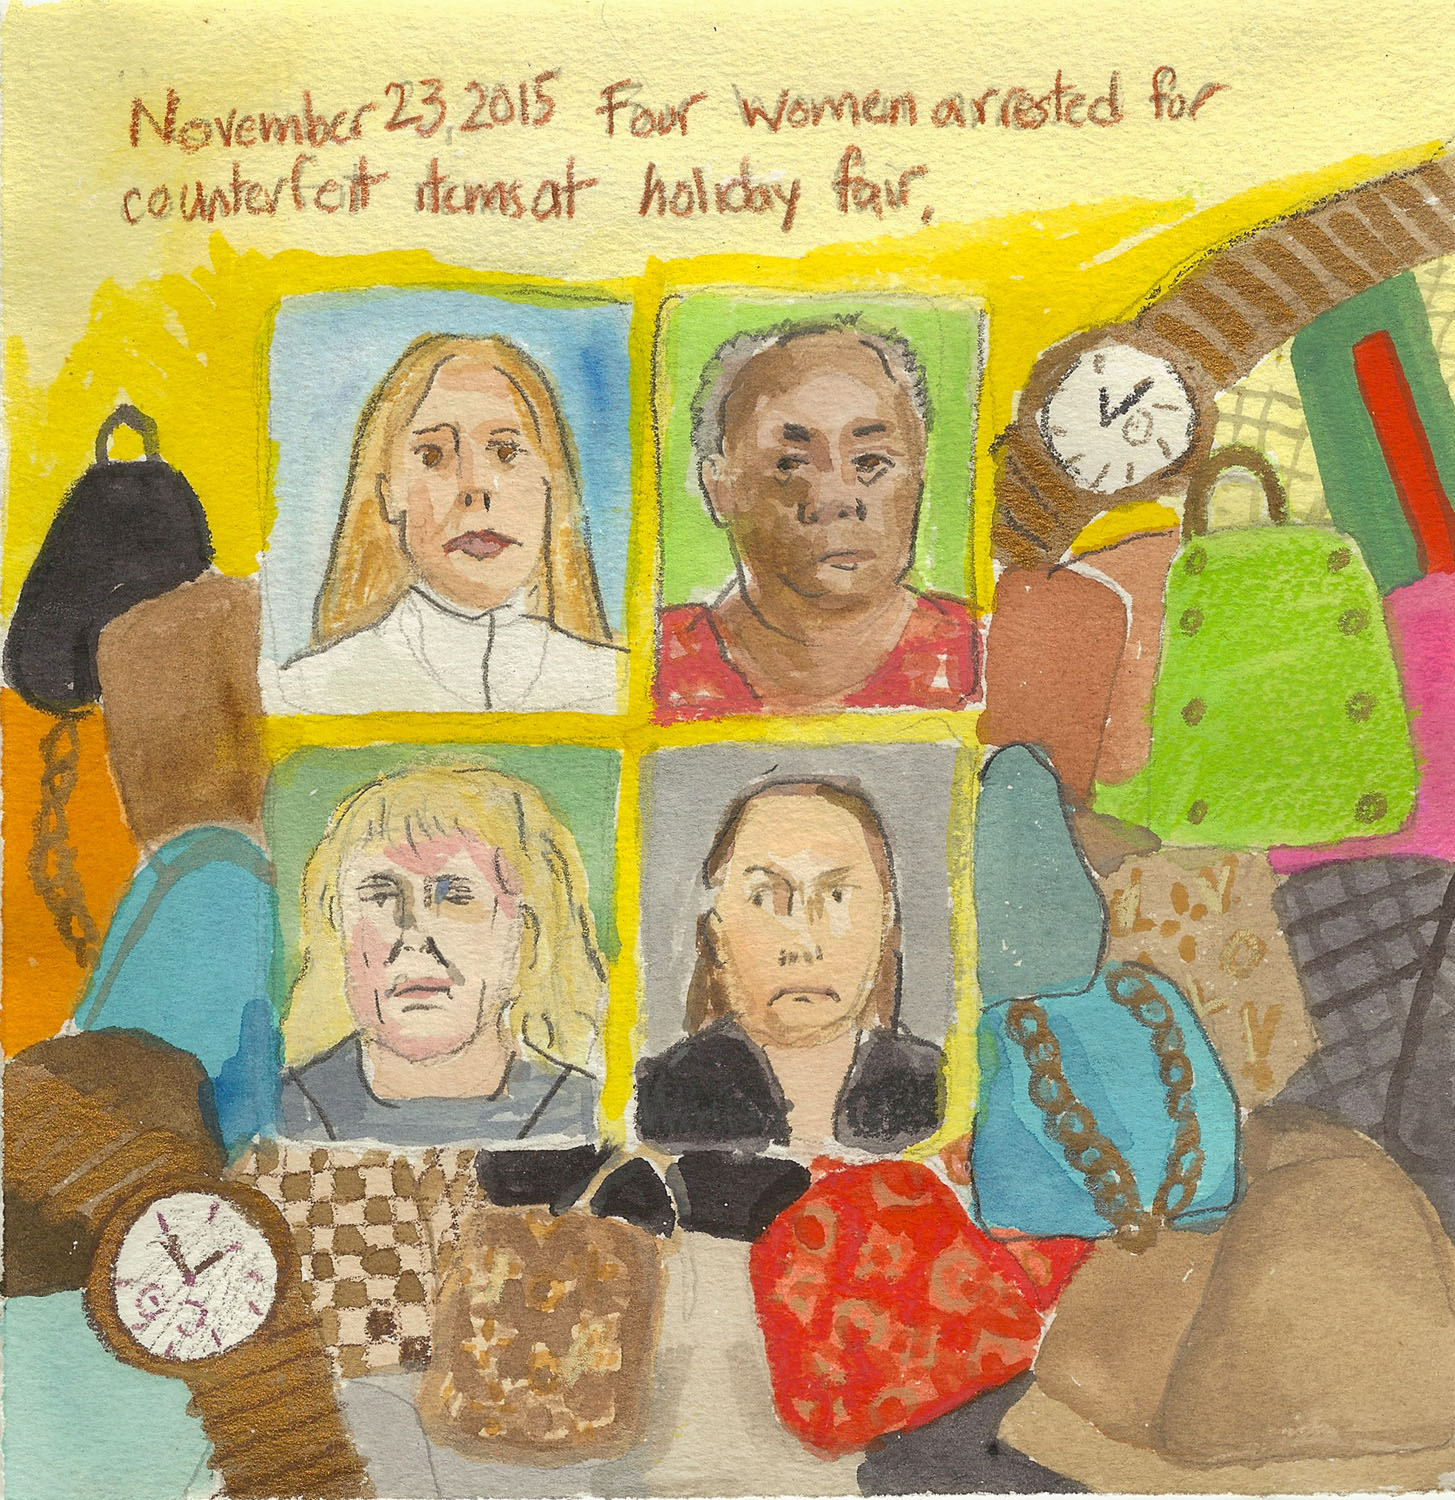 Day 2  (Nov. 23, 2015)<br>Watercolor, gouache, graphite, color pencil on paper, 7 x 6 in.<br><i>Four women arrested for counterfeit items at holiday fair.</i>